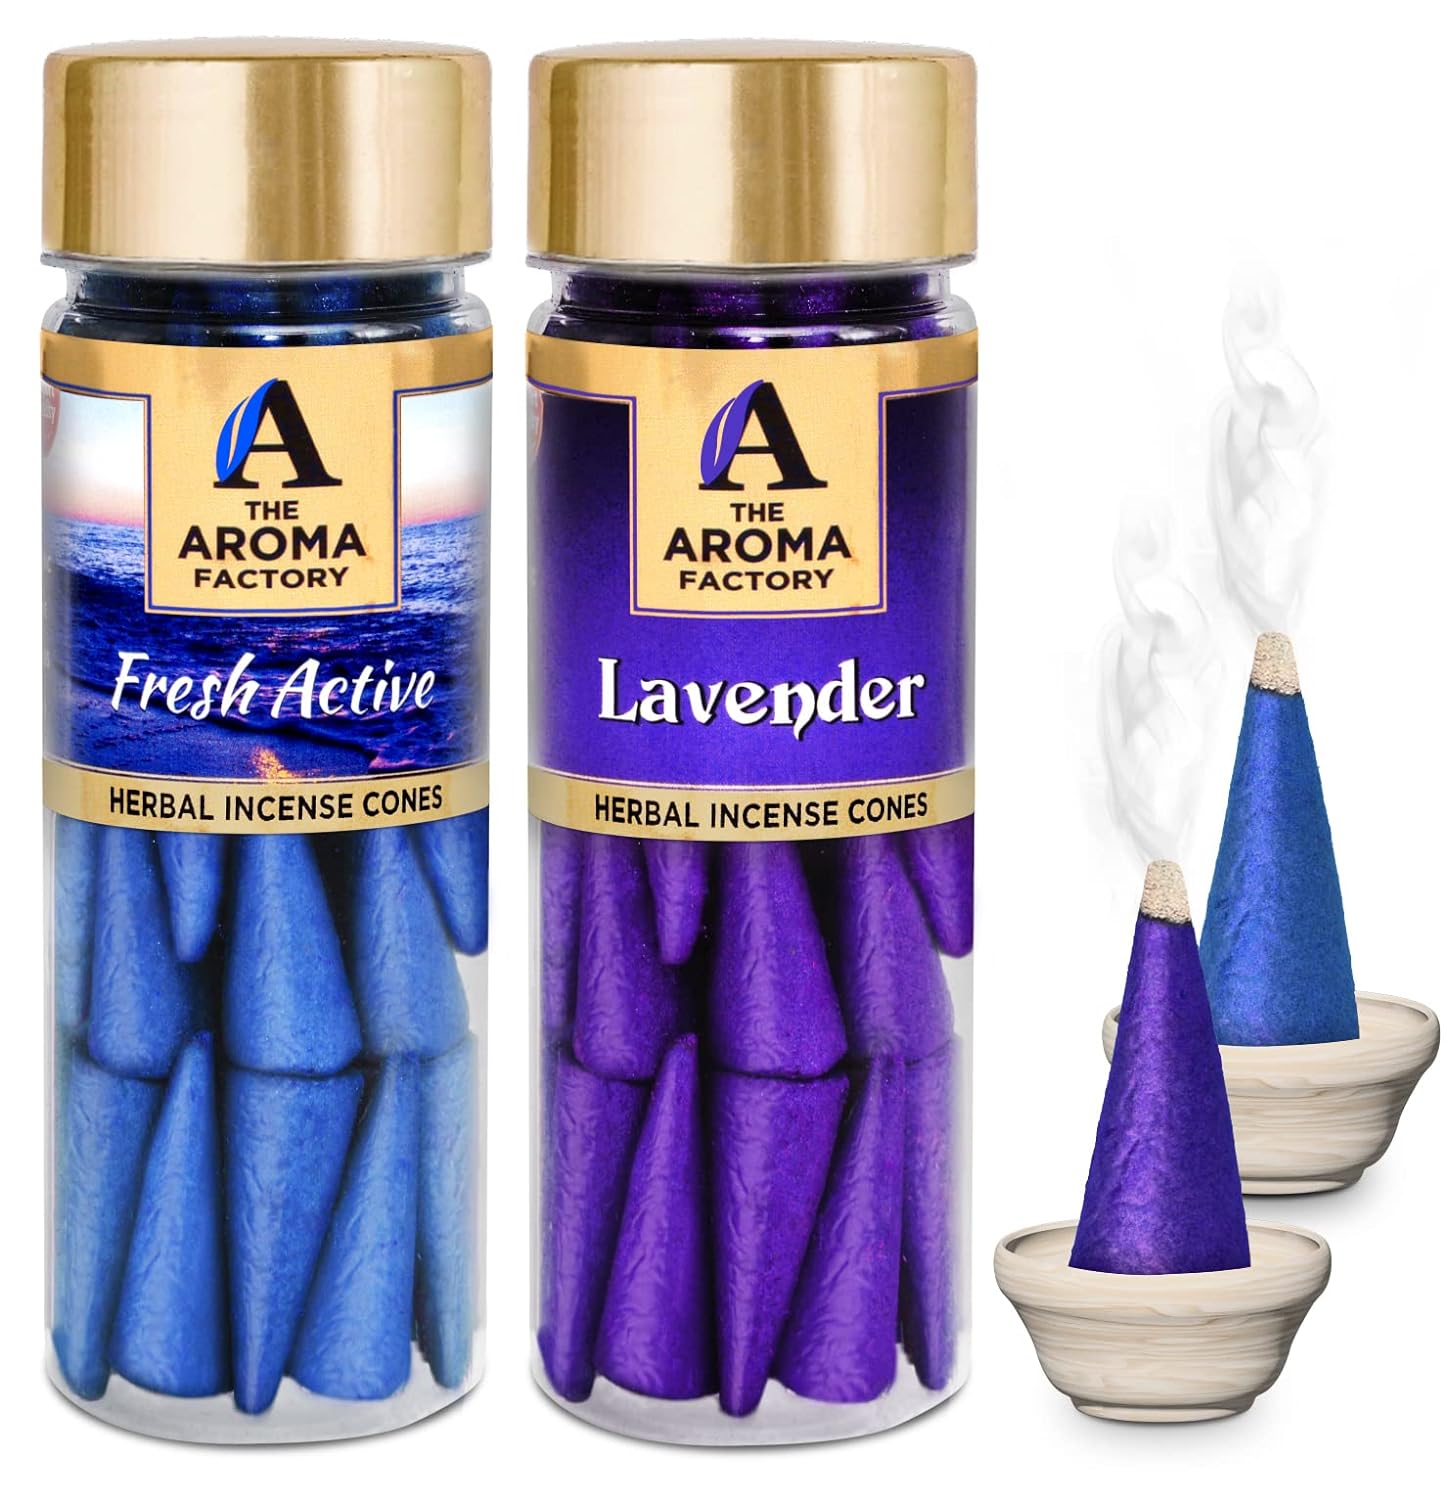 The Aroma Factory Incense Dhoop Cone for Pooja, Fresh Active & Lavender (100% Herbal & 0% Charcoal) 2 Bottles x 30 Cones